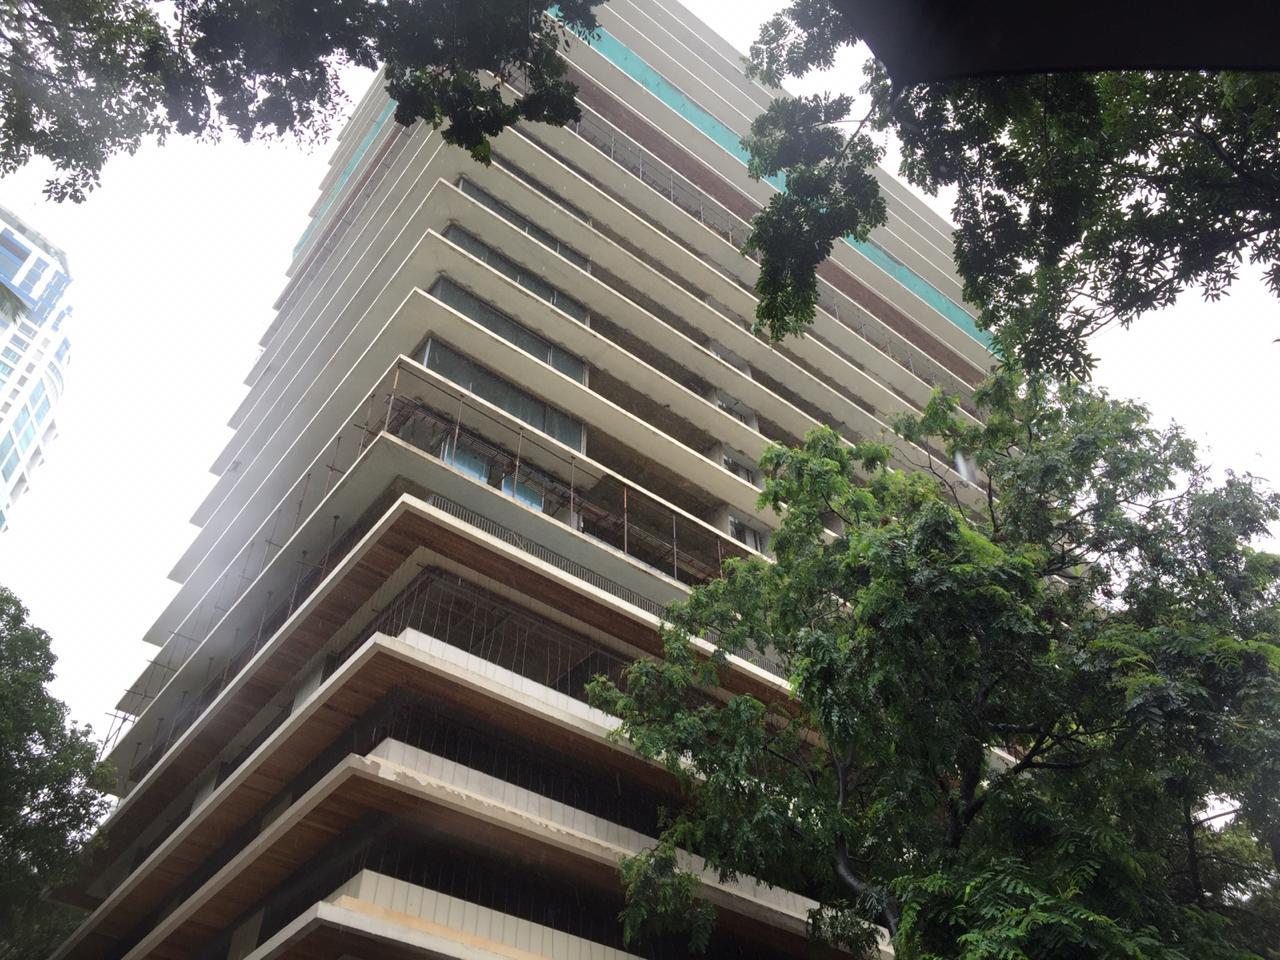 Flat Sold For Rs 1.25 lakh per square feet in Carmicahel Road